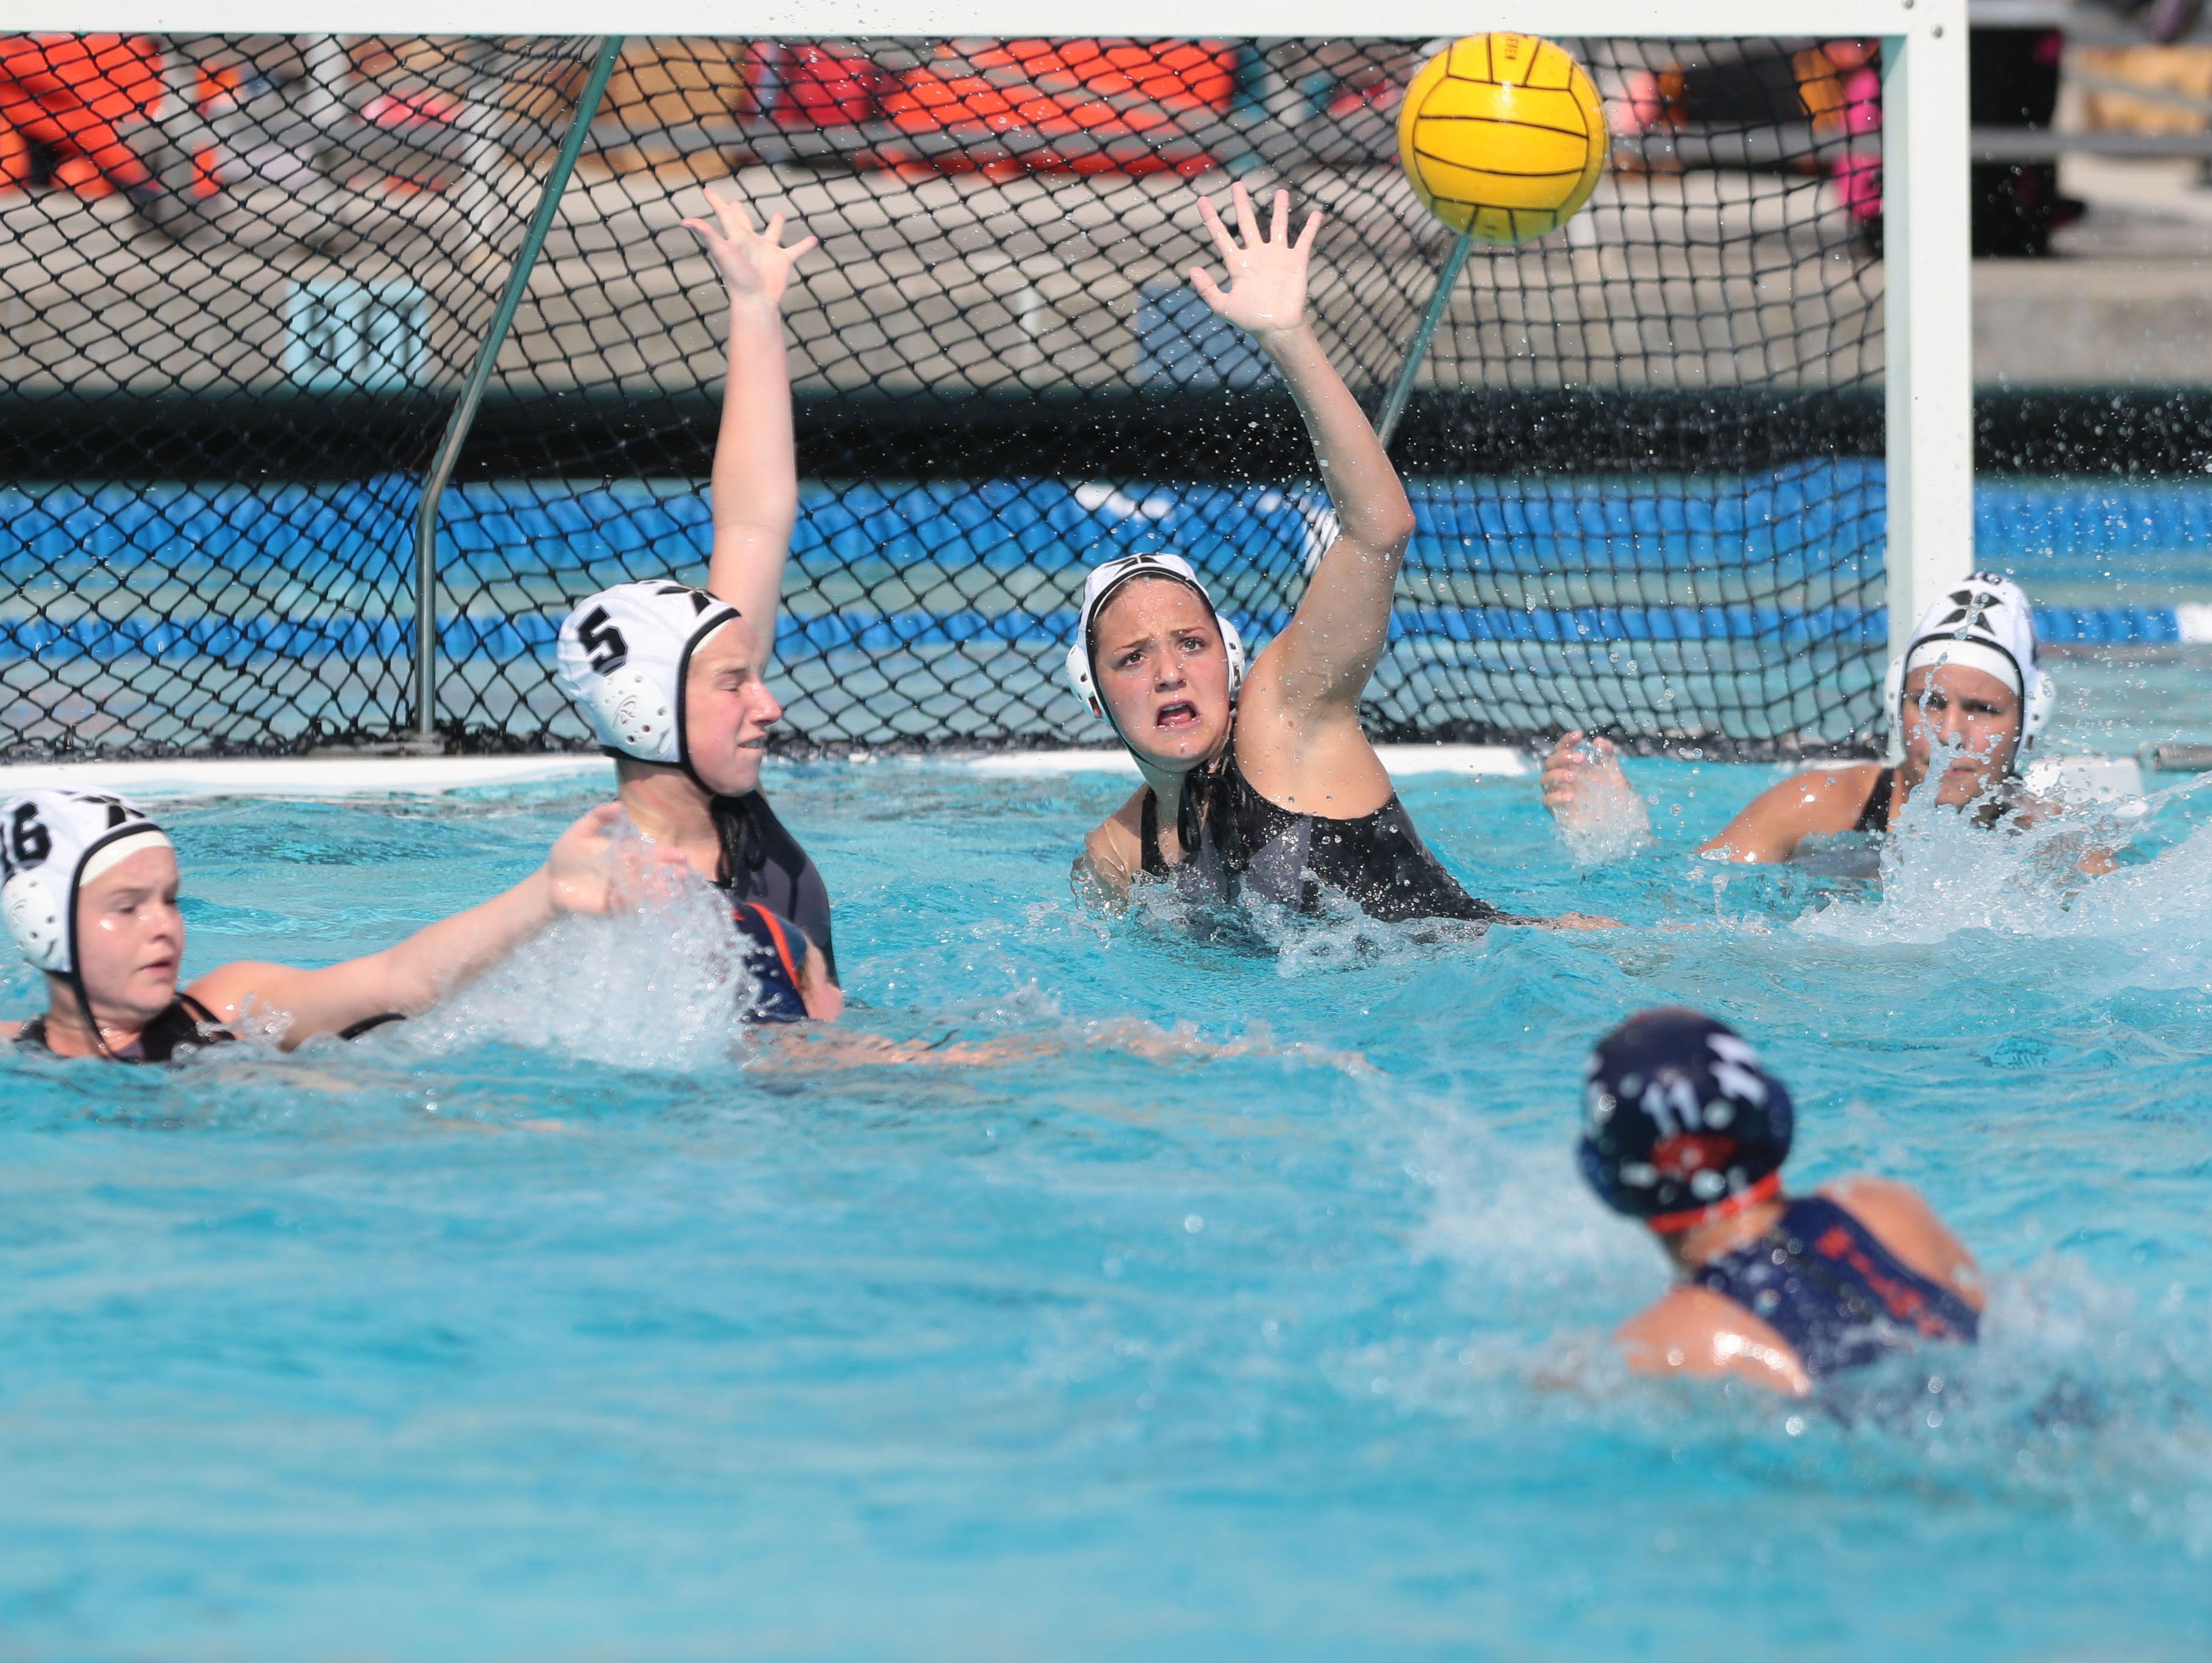 Xavier Preparatory Saints defend the net against the Polytechnic Panthers during the CIF Southern Section Division 5 finals in Irvine on Saturday, February 25, 2017.